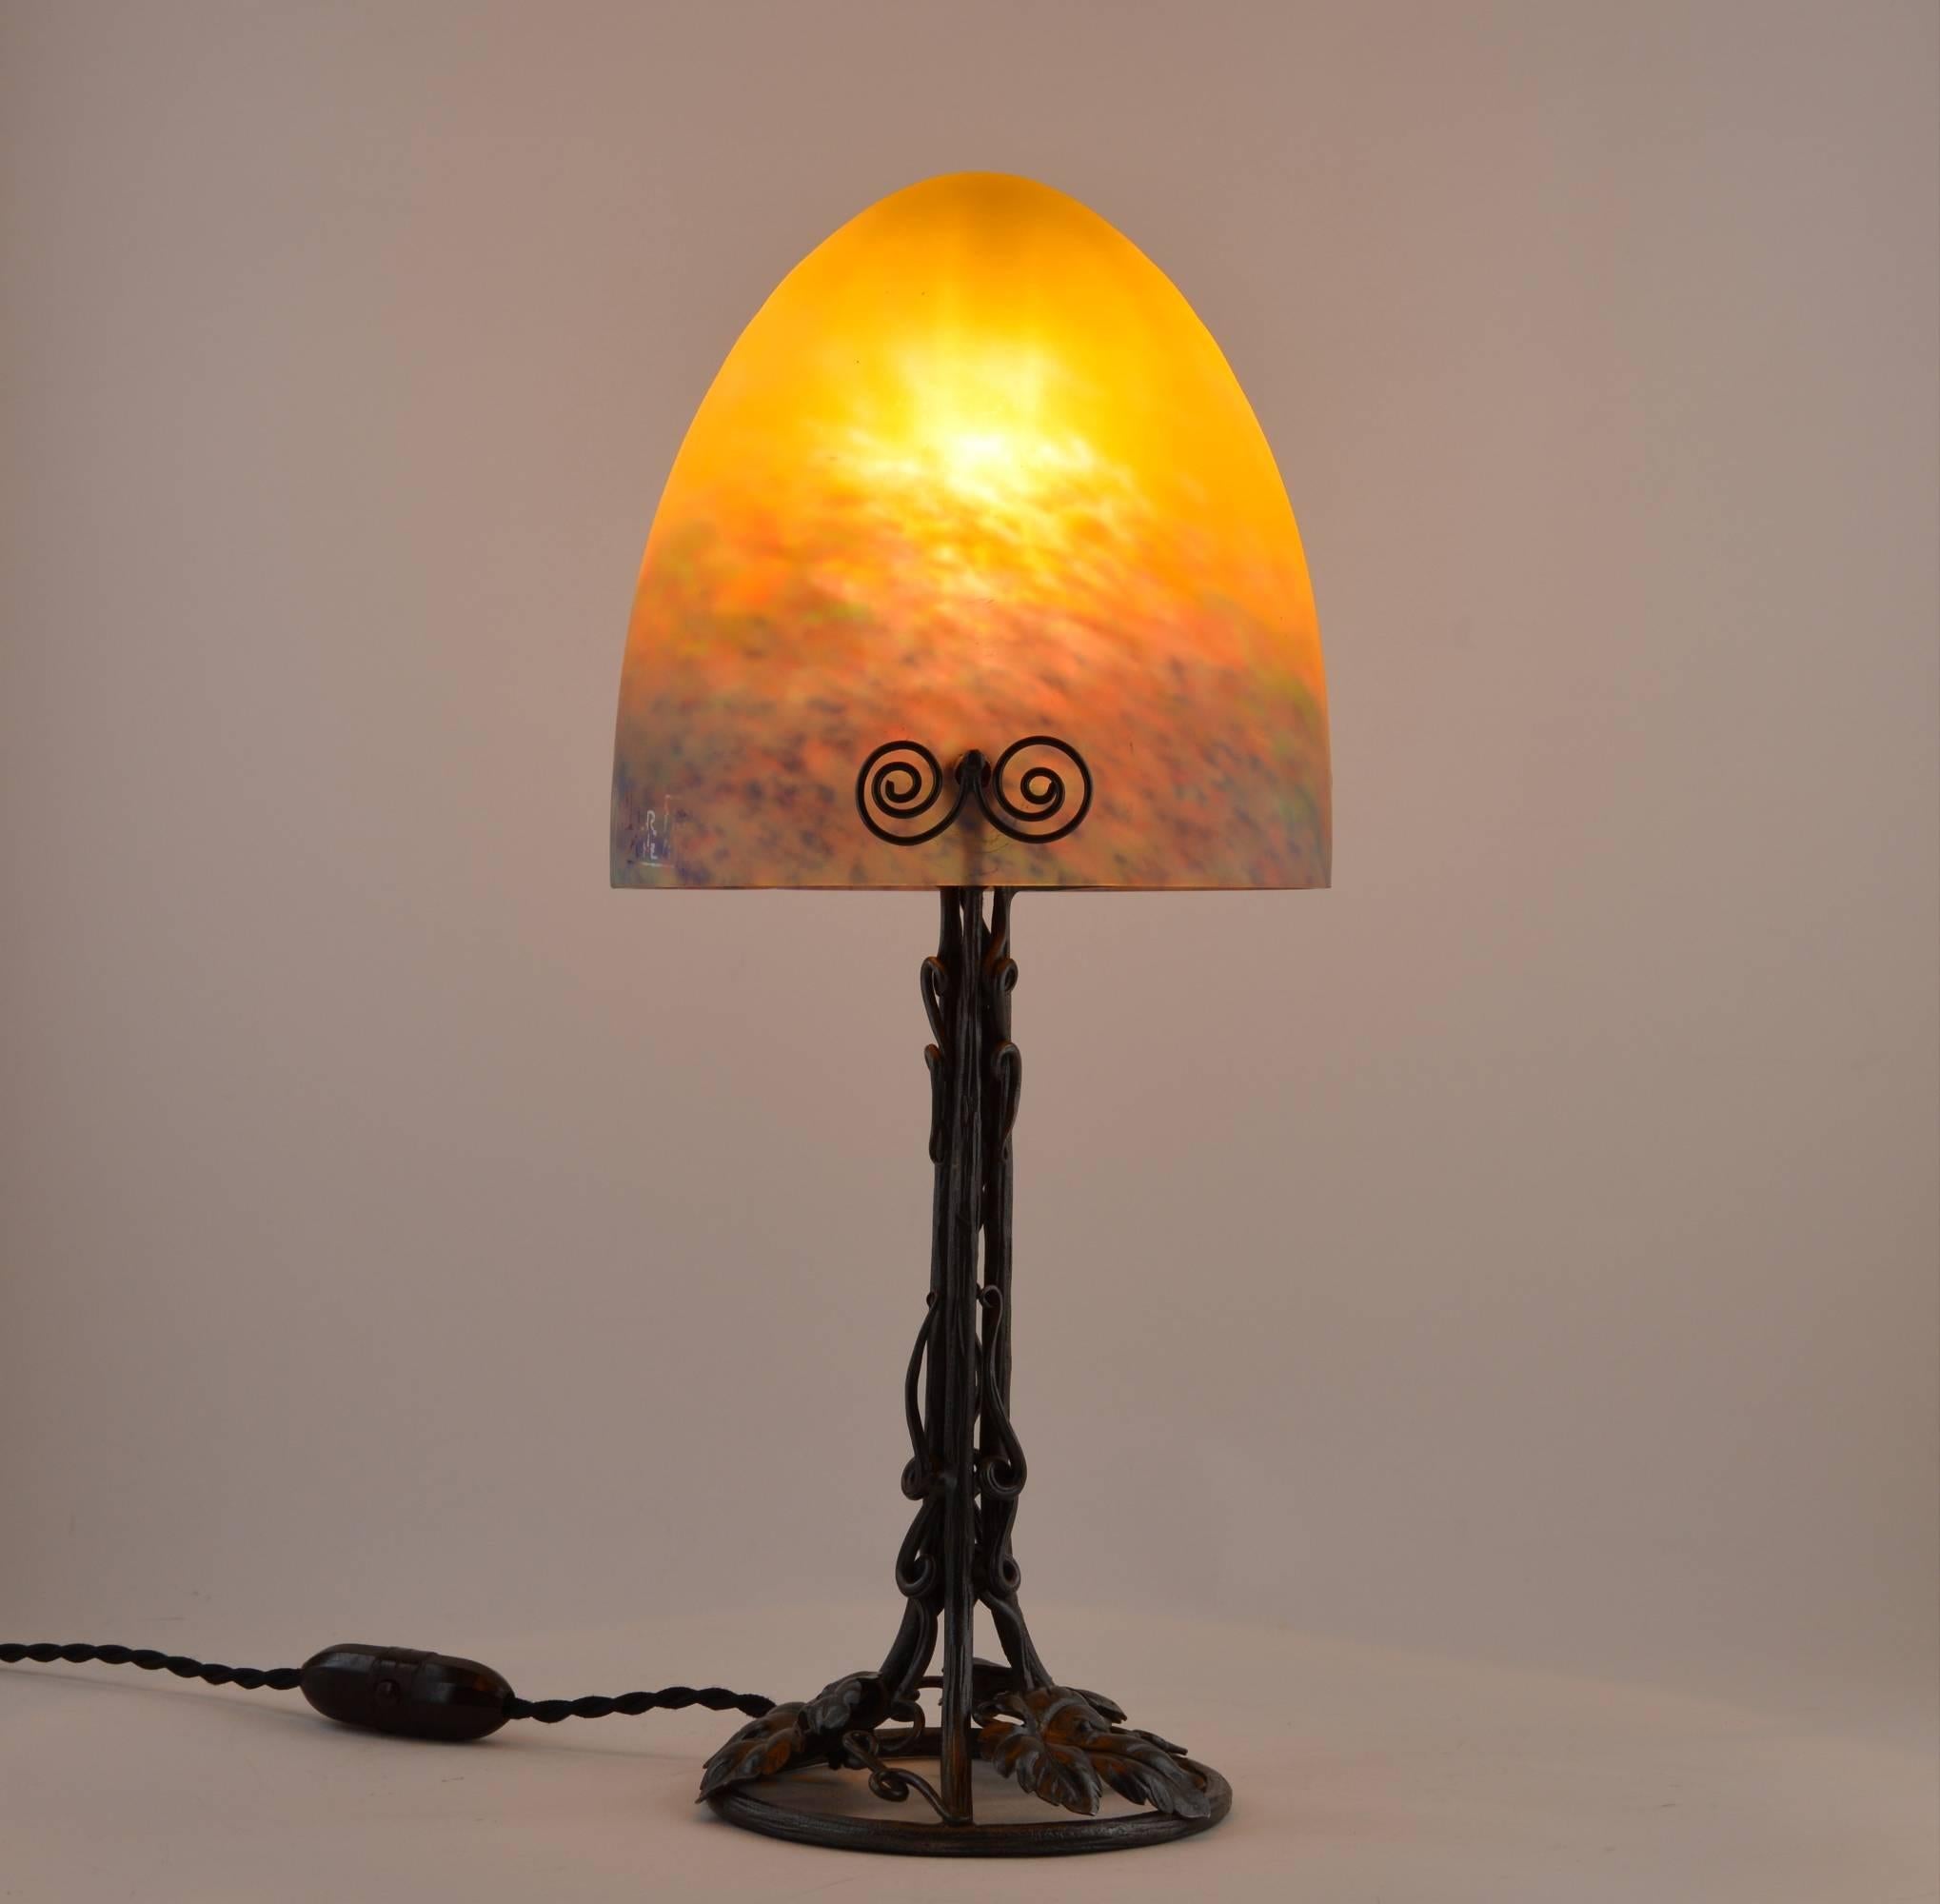 French Art Deco table lamp by Muller Freres, Luneville, early 1920s. The shade is made of blown double glass with powder applications between both layers. Colors are dark yellow, blue, turquoise blue and pink. On an exquisite wrought-irin base.